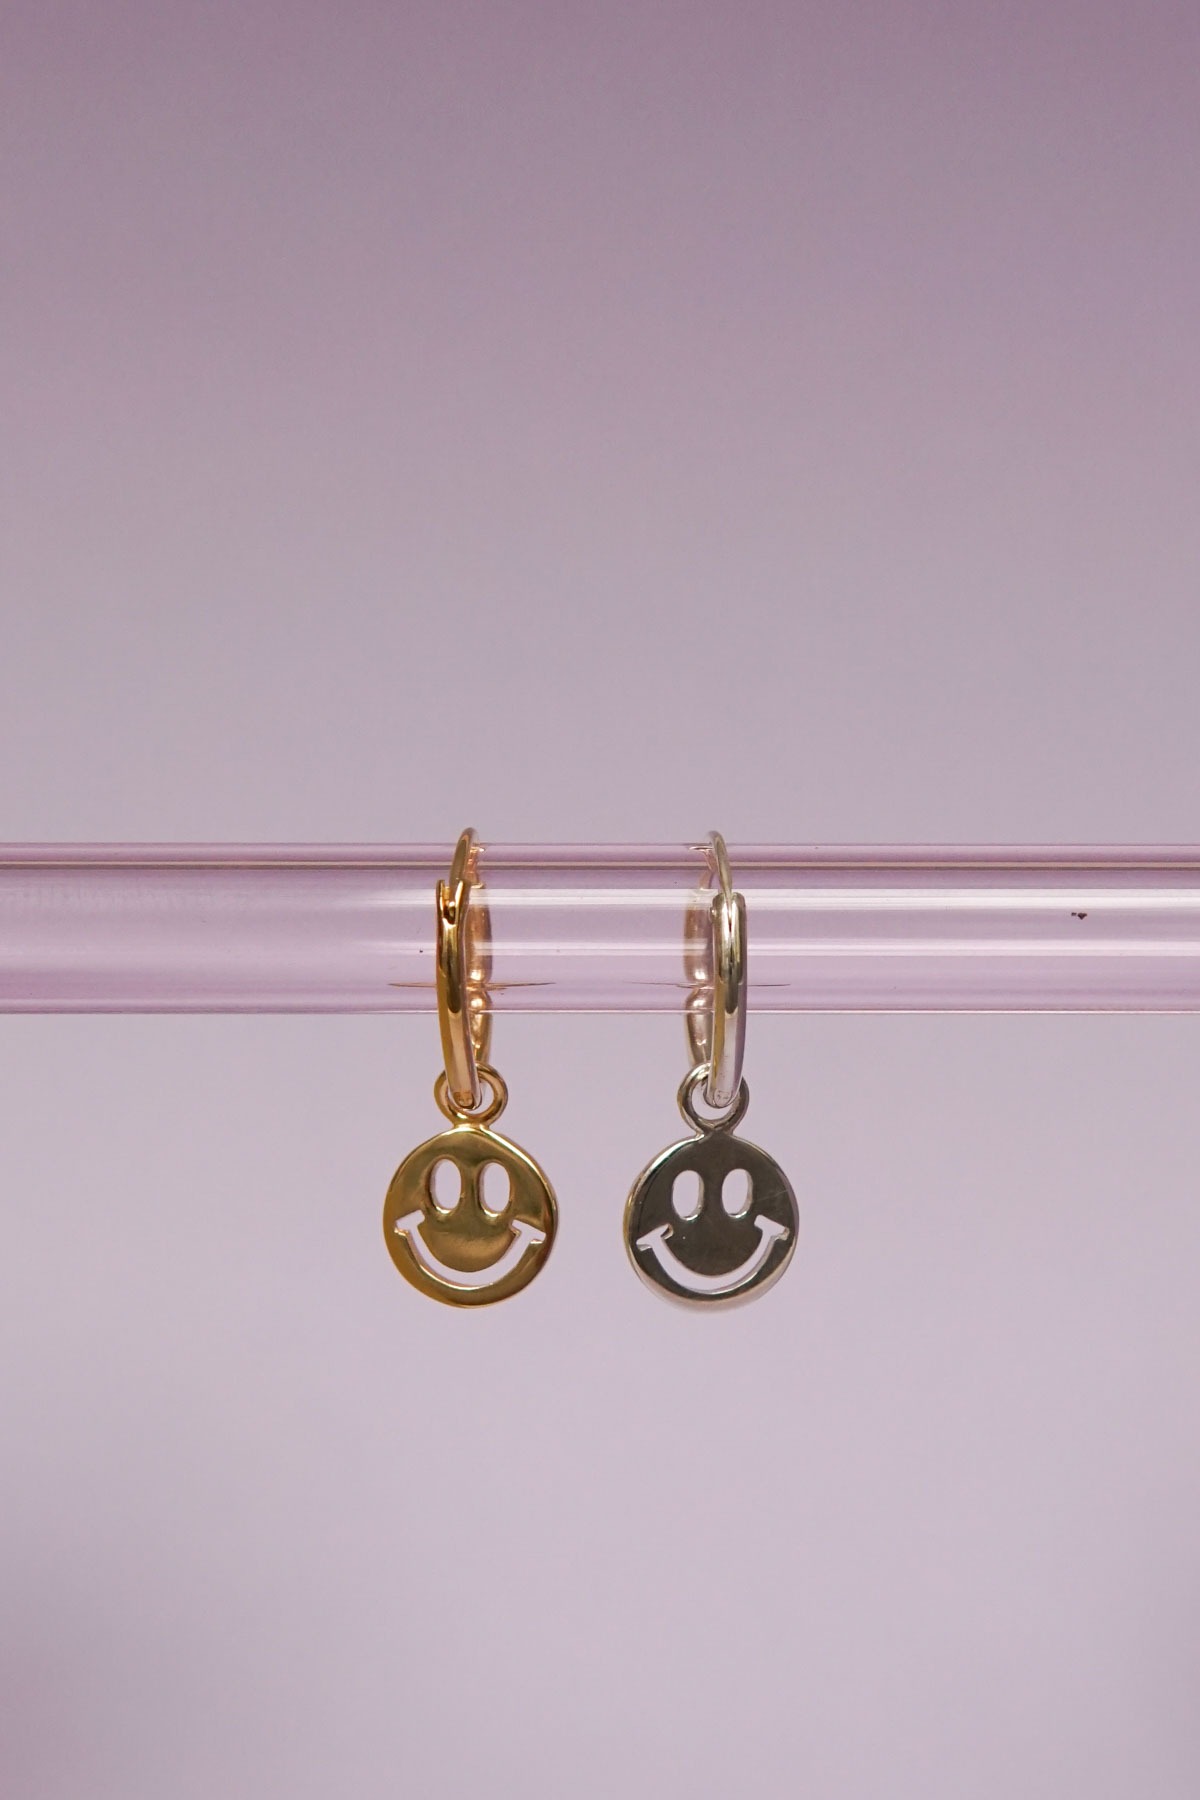 wildthings collectables - Smiley coin earring gold plated